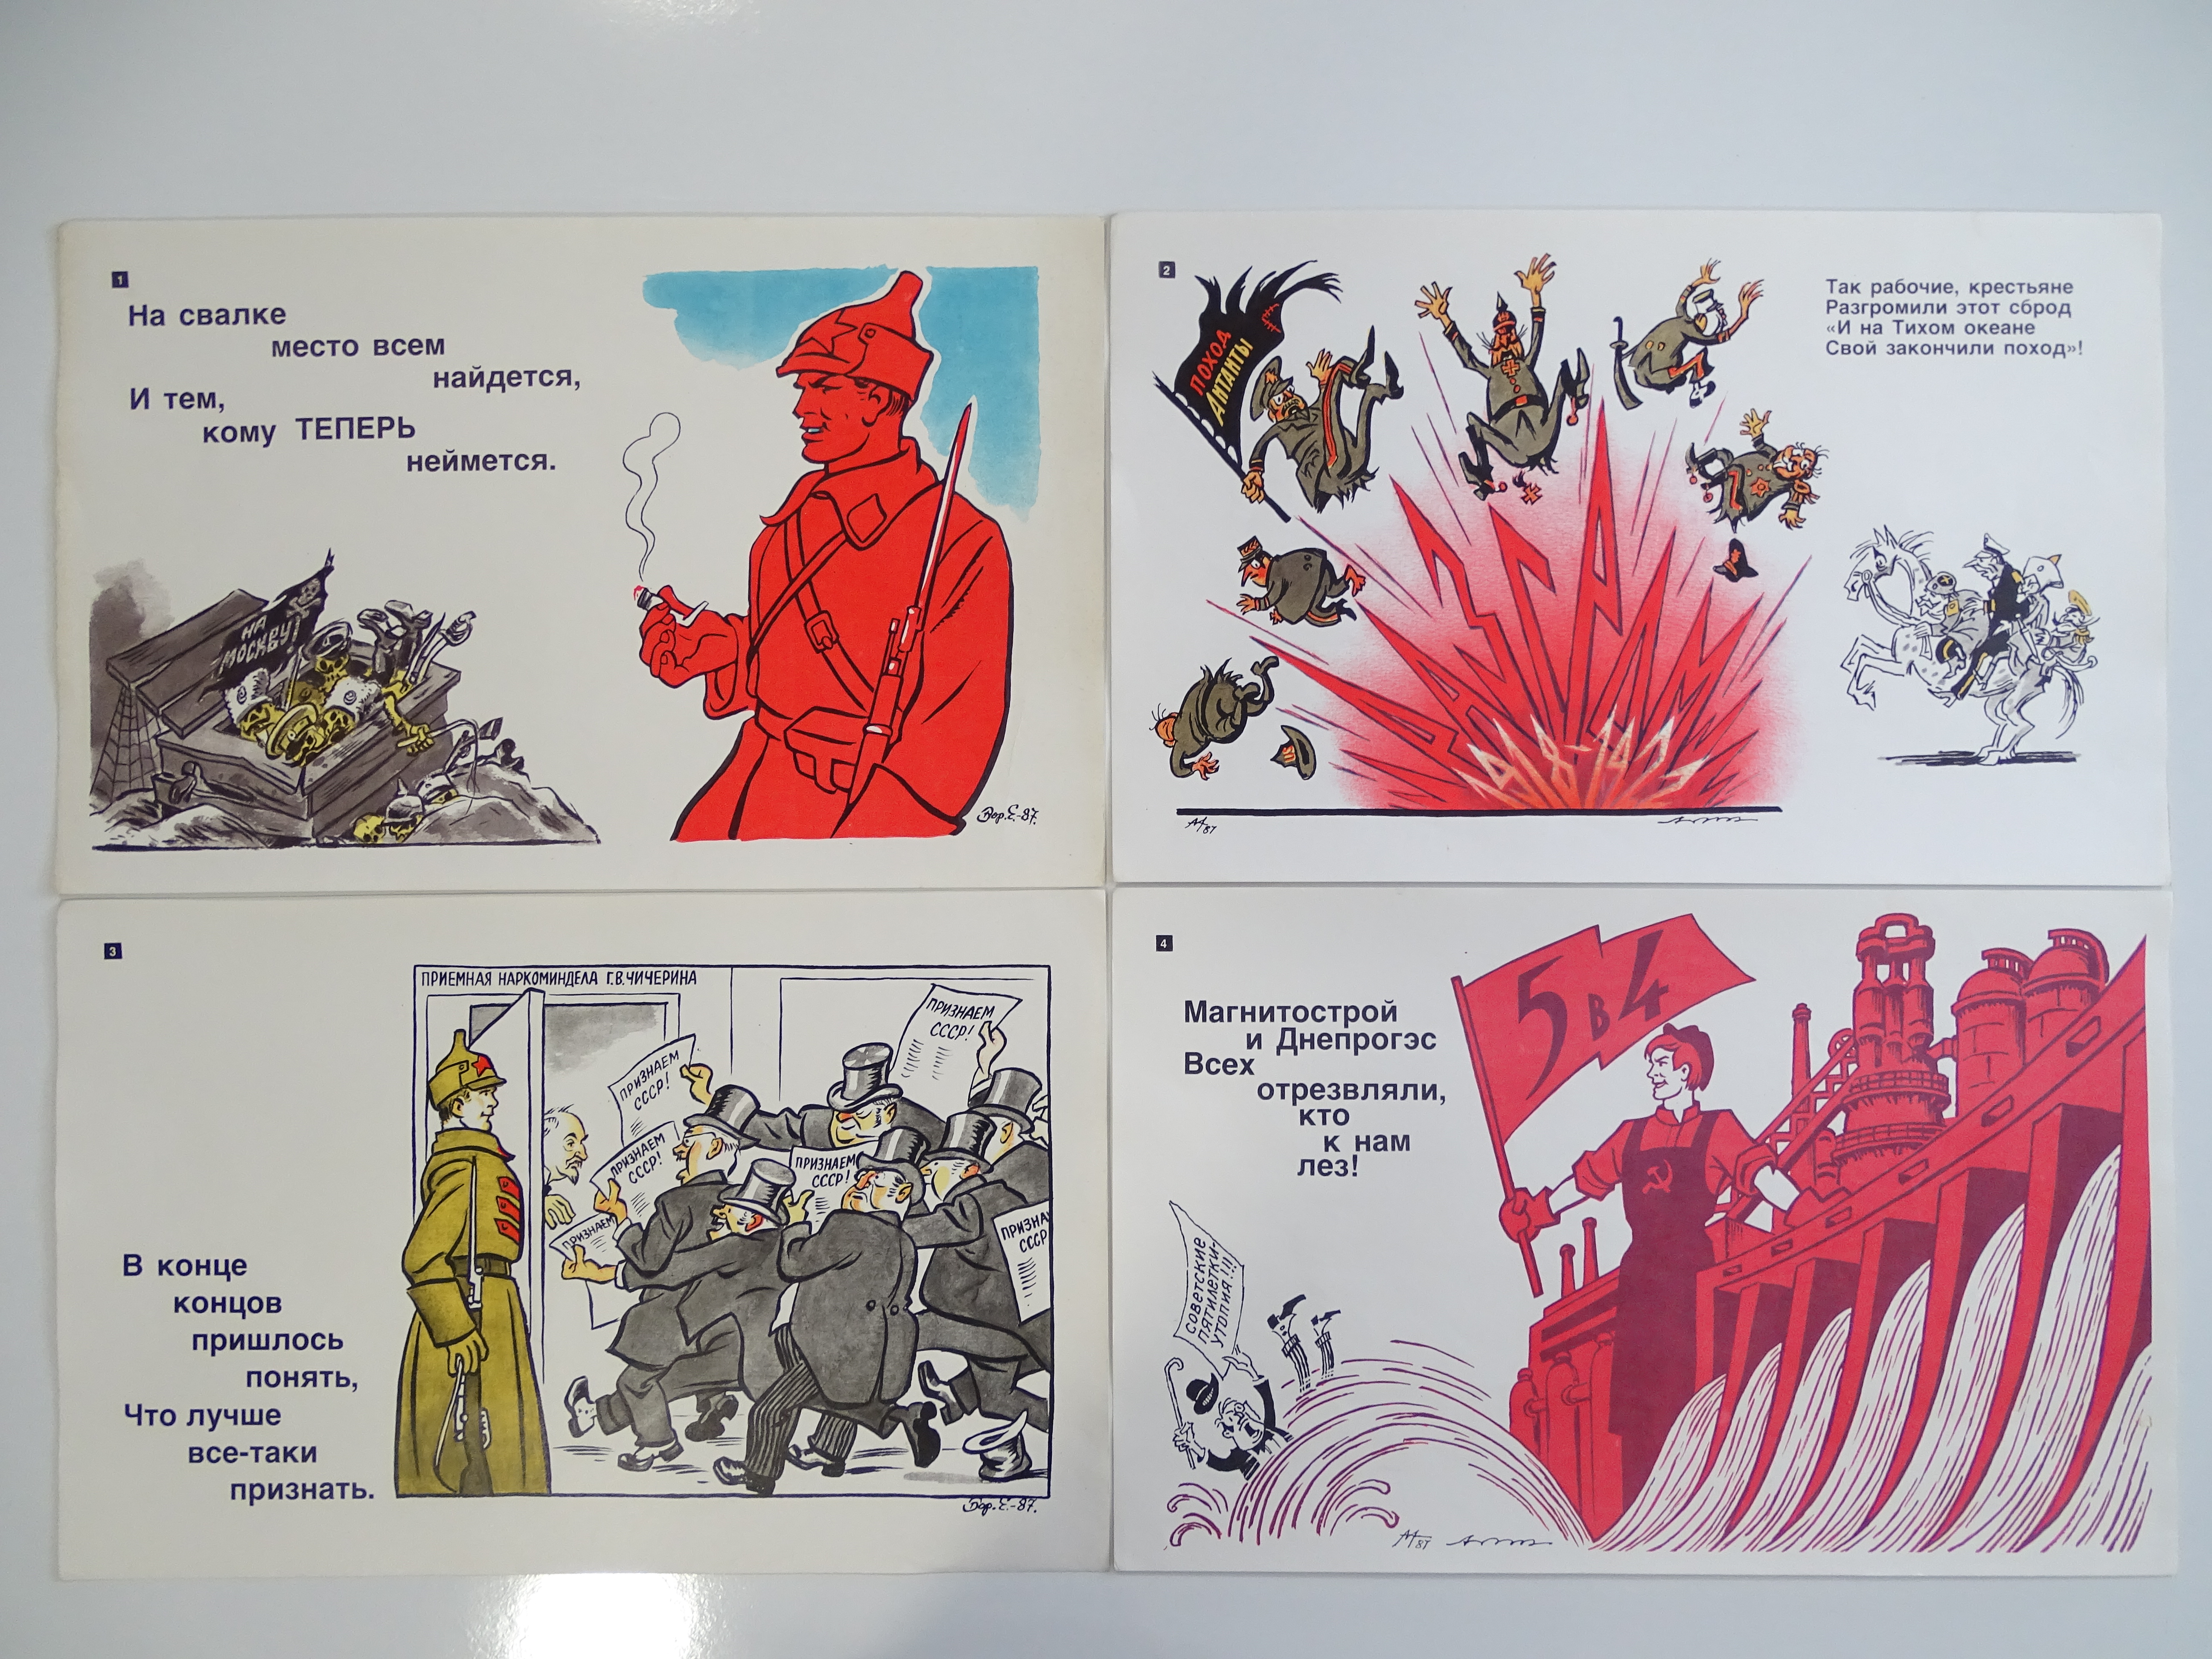 ART INTO POLITICS: The role of artists in the unfolding of events in the Russian Revolution of - Image 4 of 9